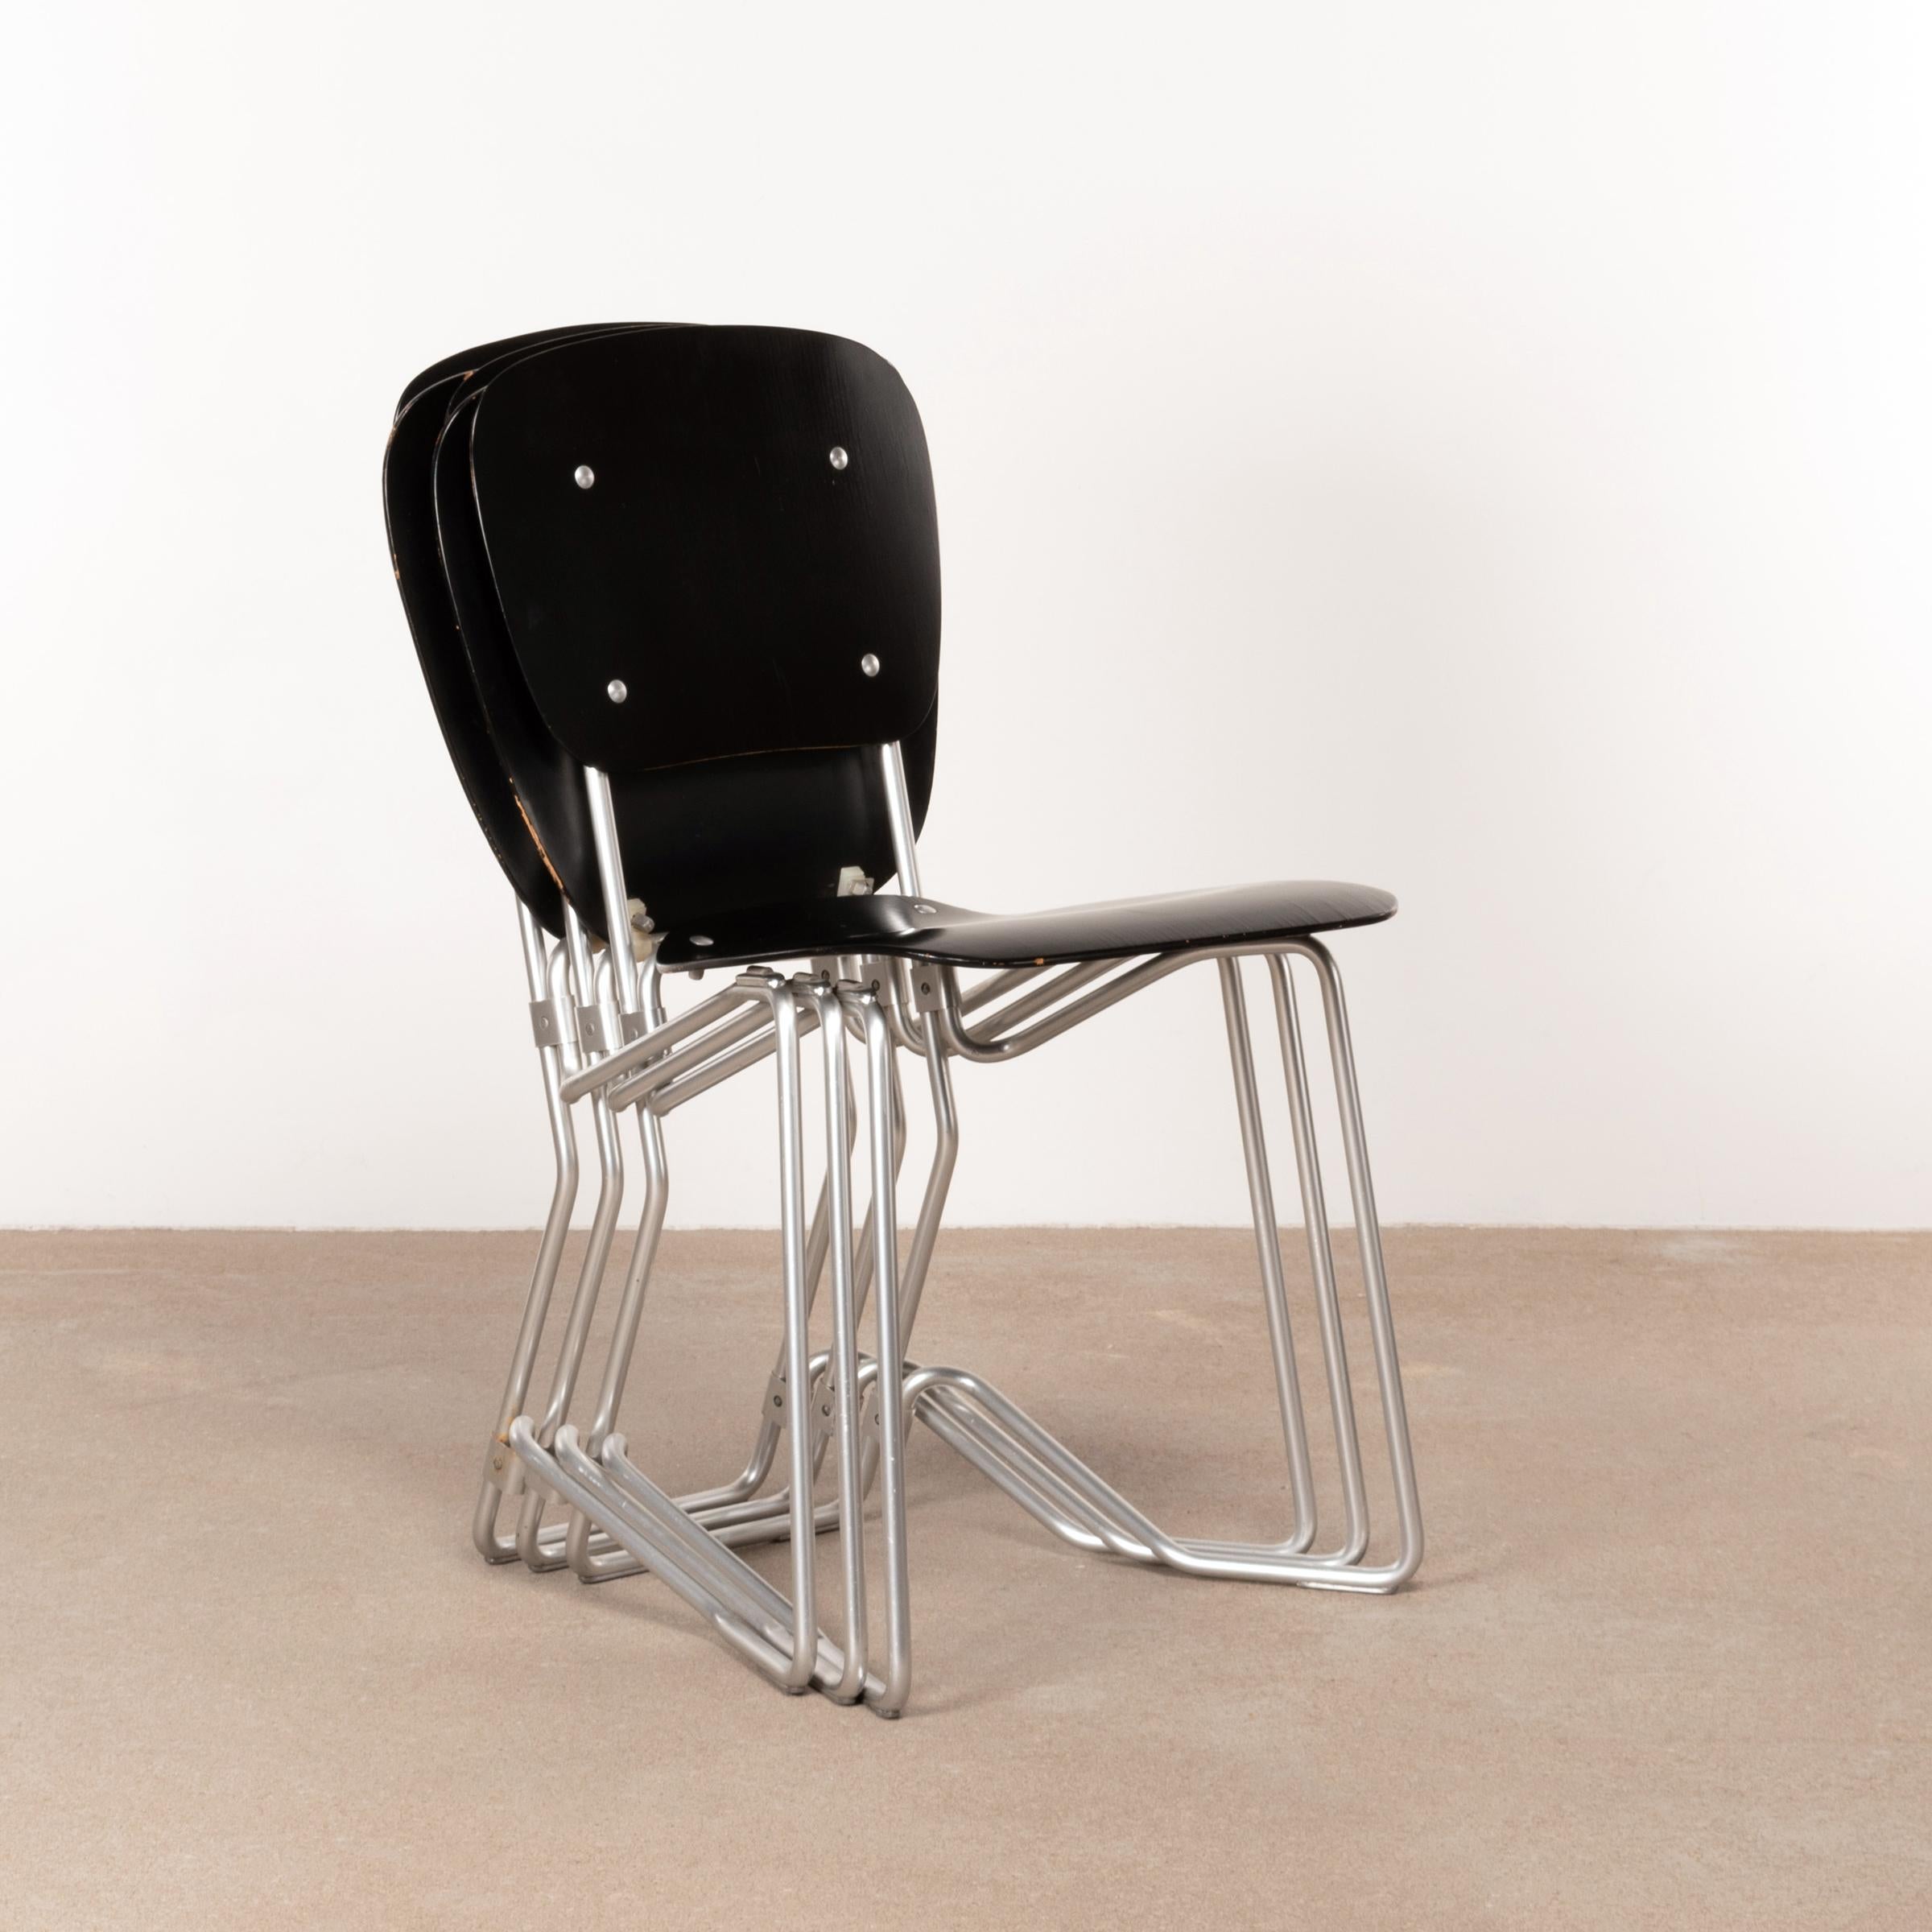 Mid-Century Modern Armin Wirth Early Folding Stacking Chair in Black Plywood / Aluminum for Aluflex